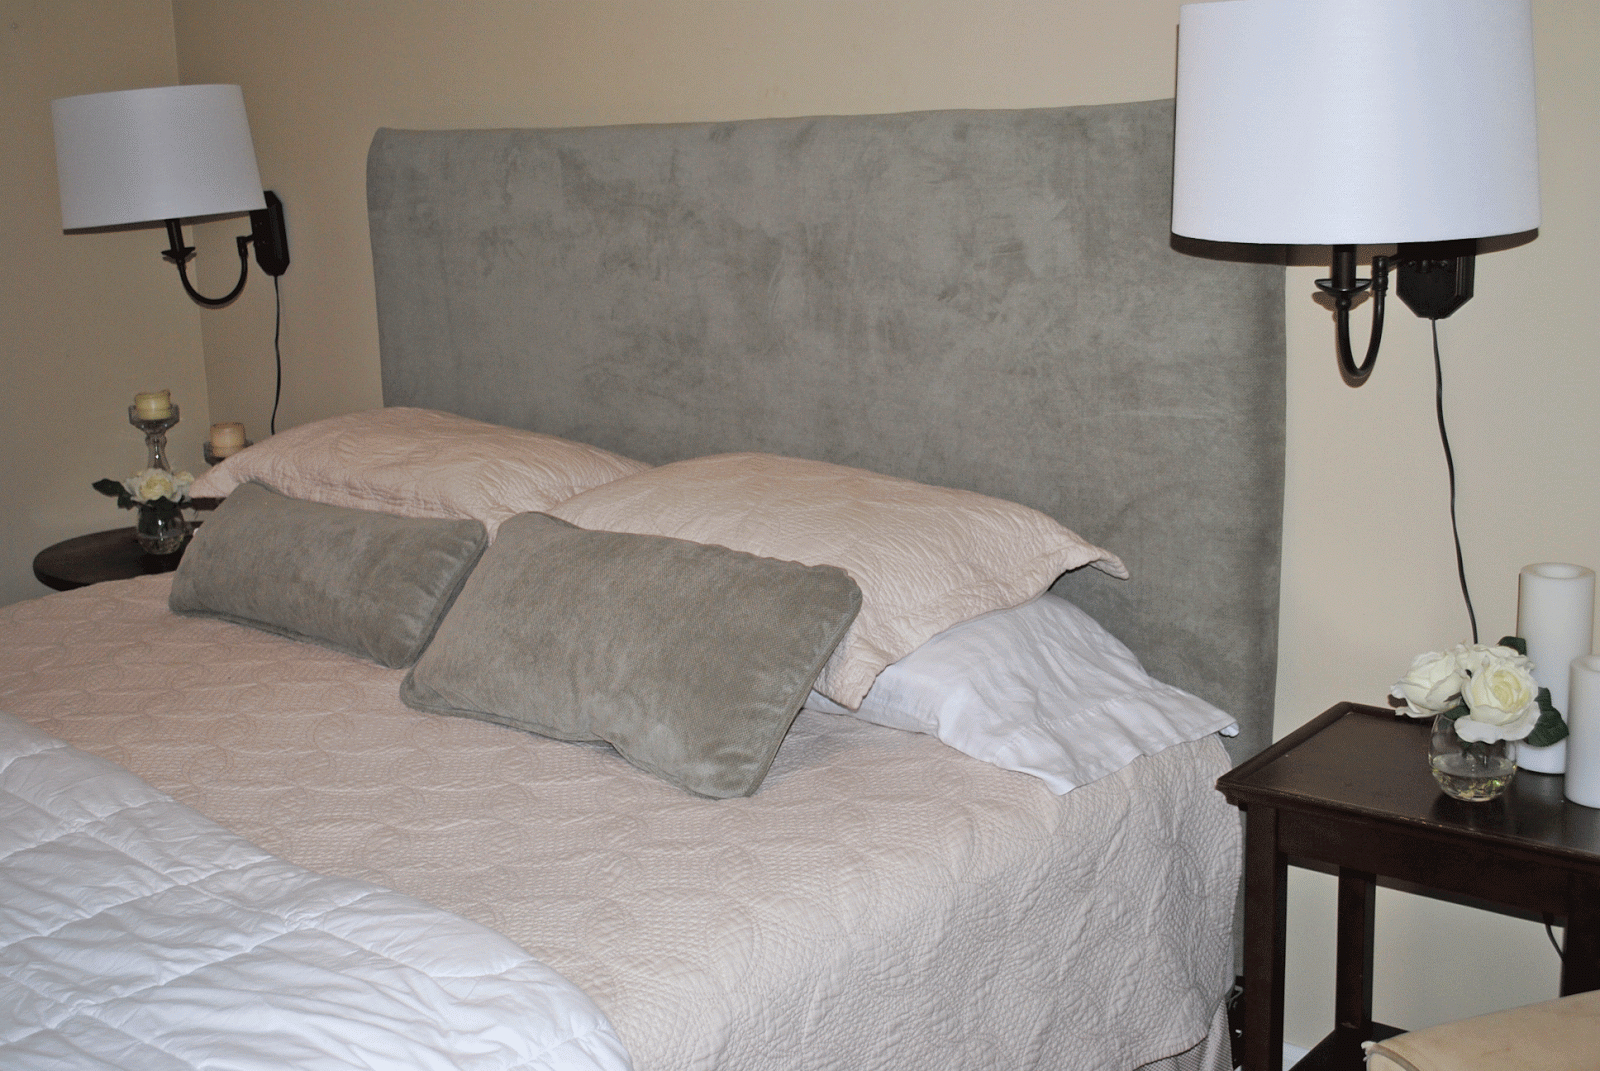 Size Headboards size diy Beds headboards For for king Diy beds King